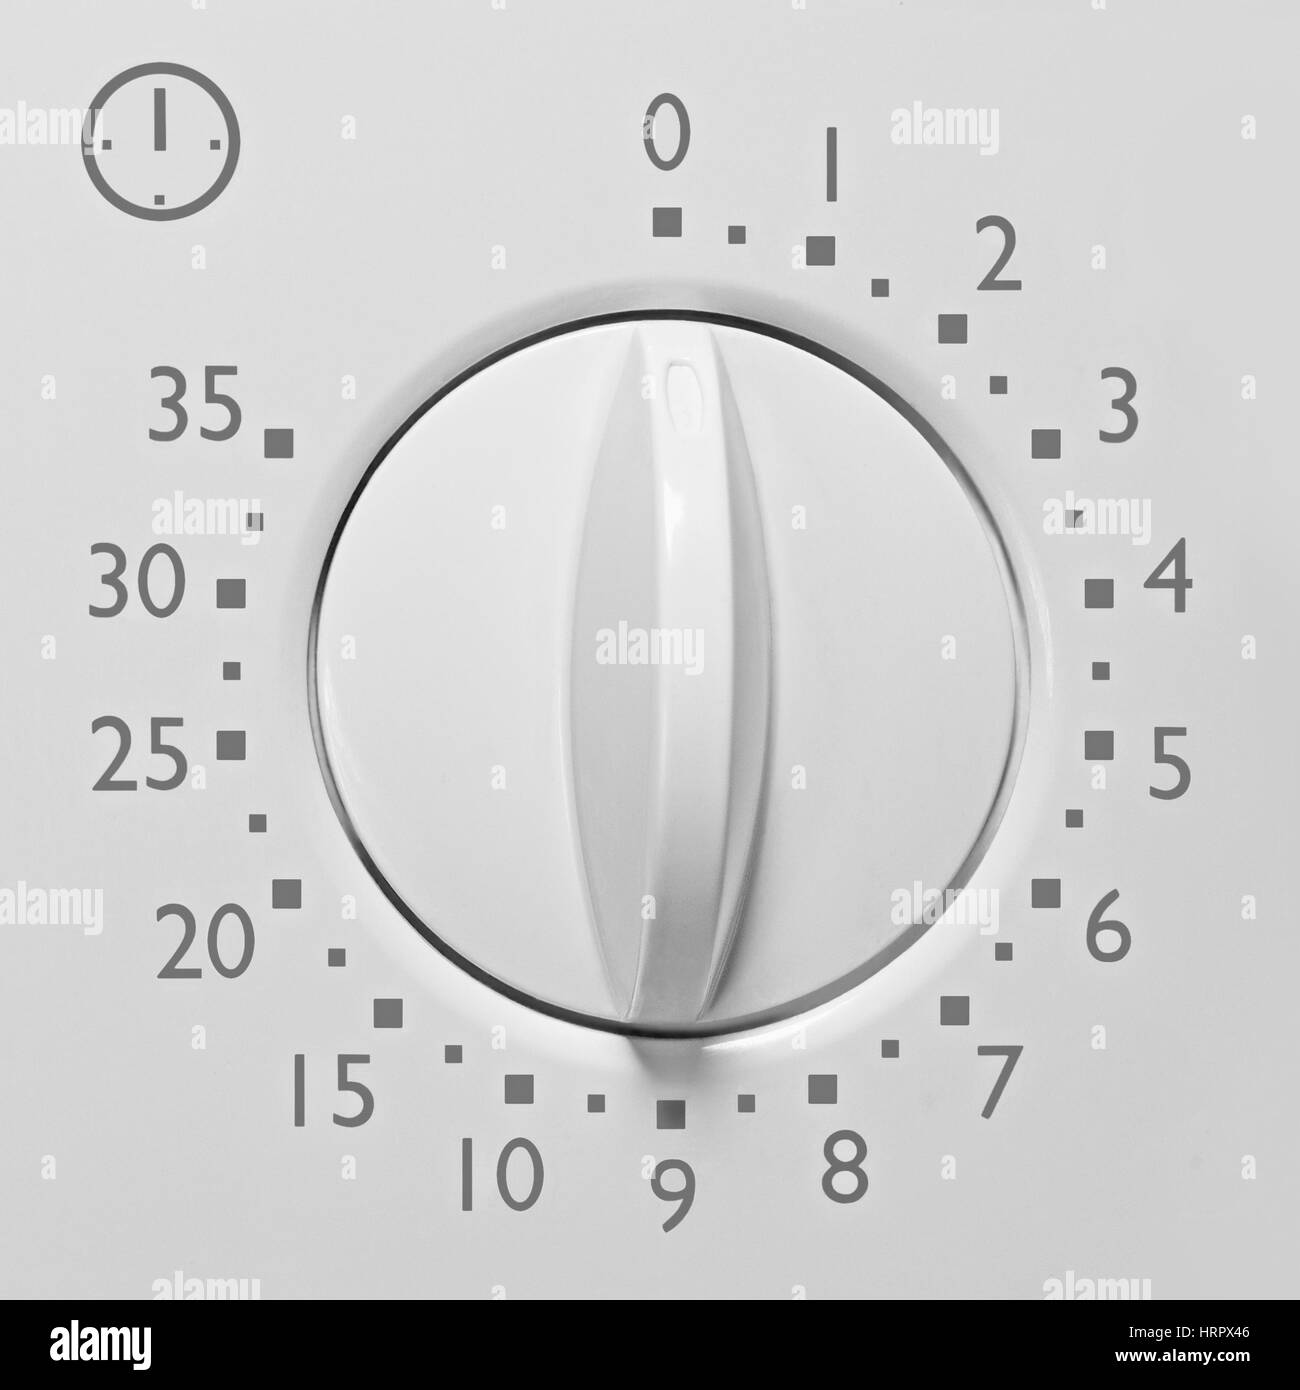 Analog 35 minute microwave oven timer, analogue vintage white dial face macro closeup grey numbers and icon, large background copy space Stock Photo